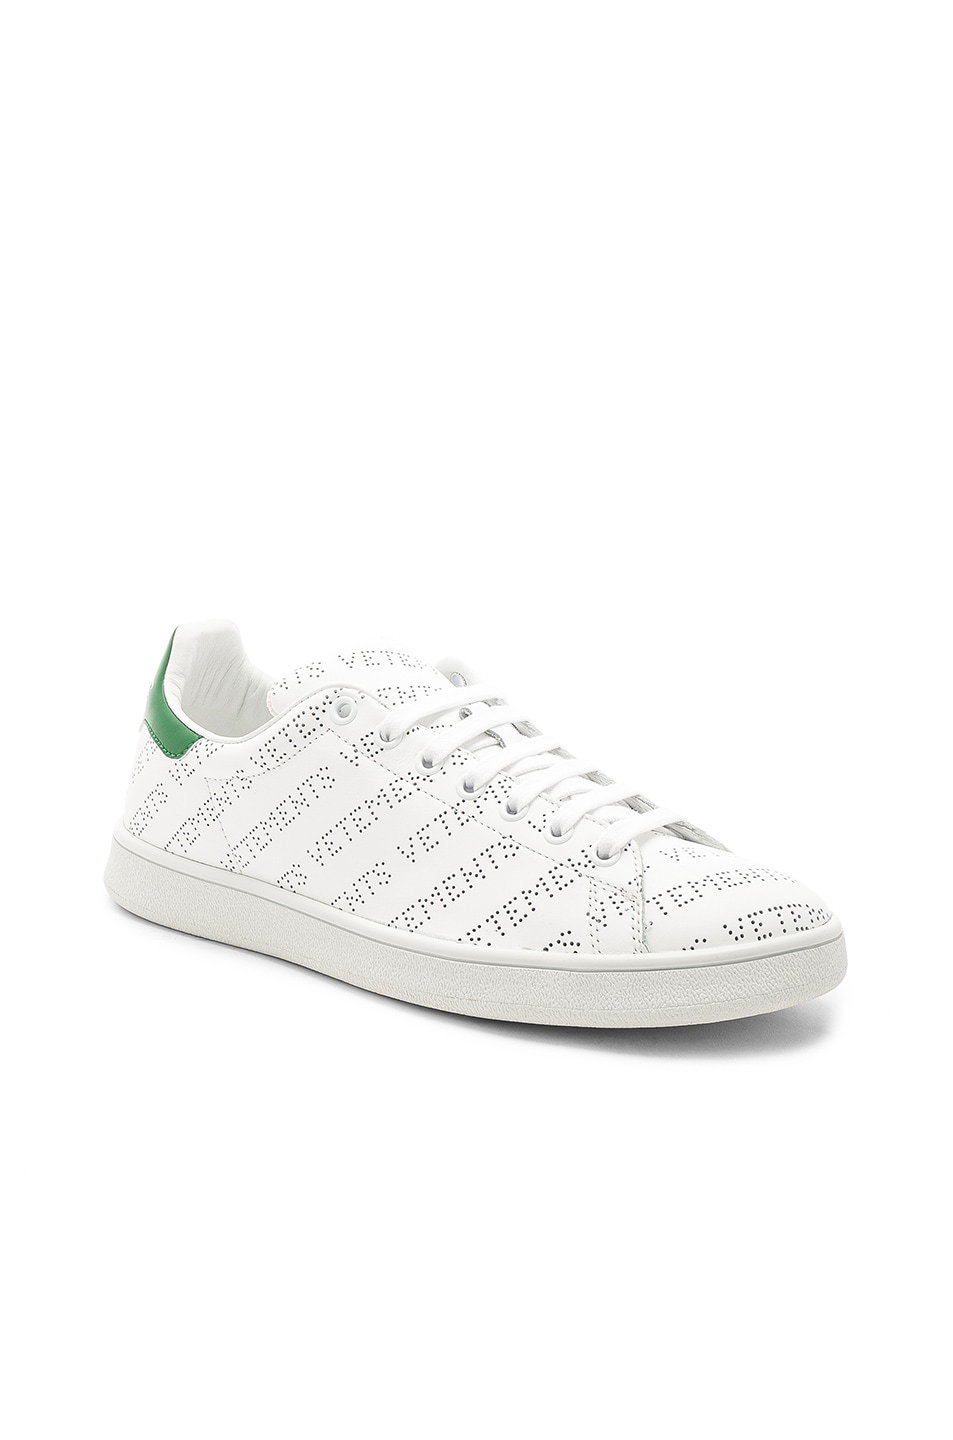 Image 1 of VETEMENTS Perforated Leather Sneakers in White & Green